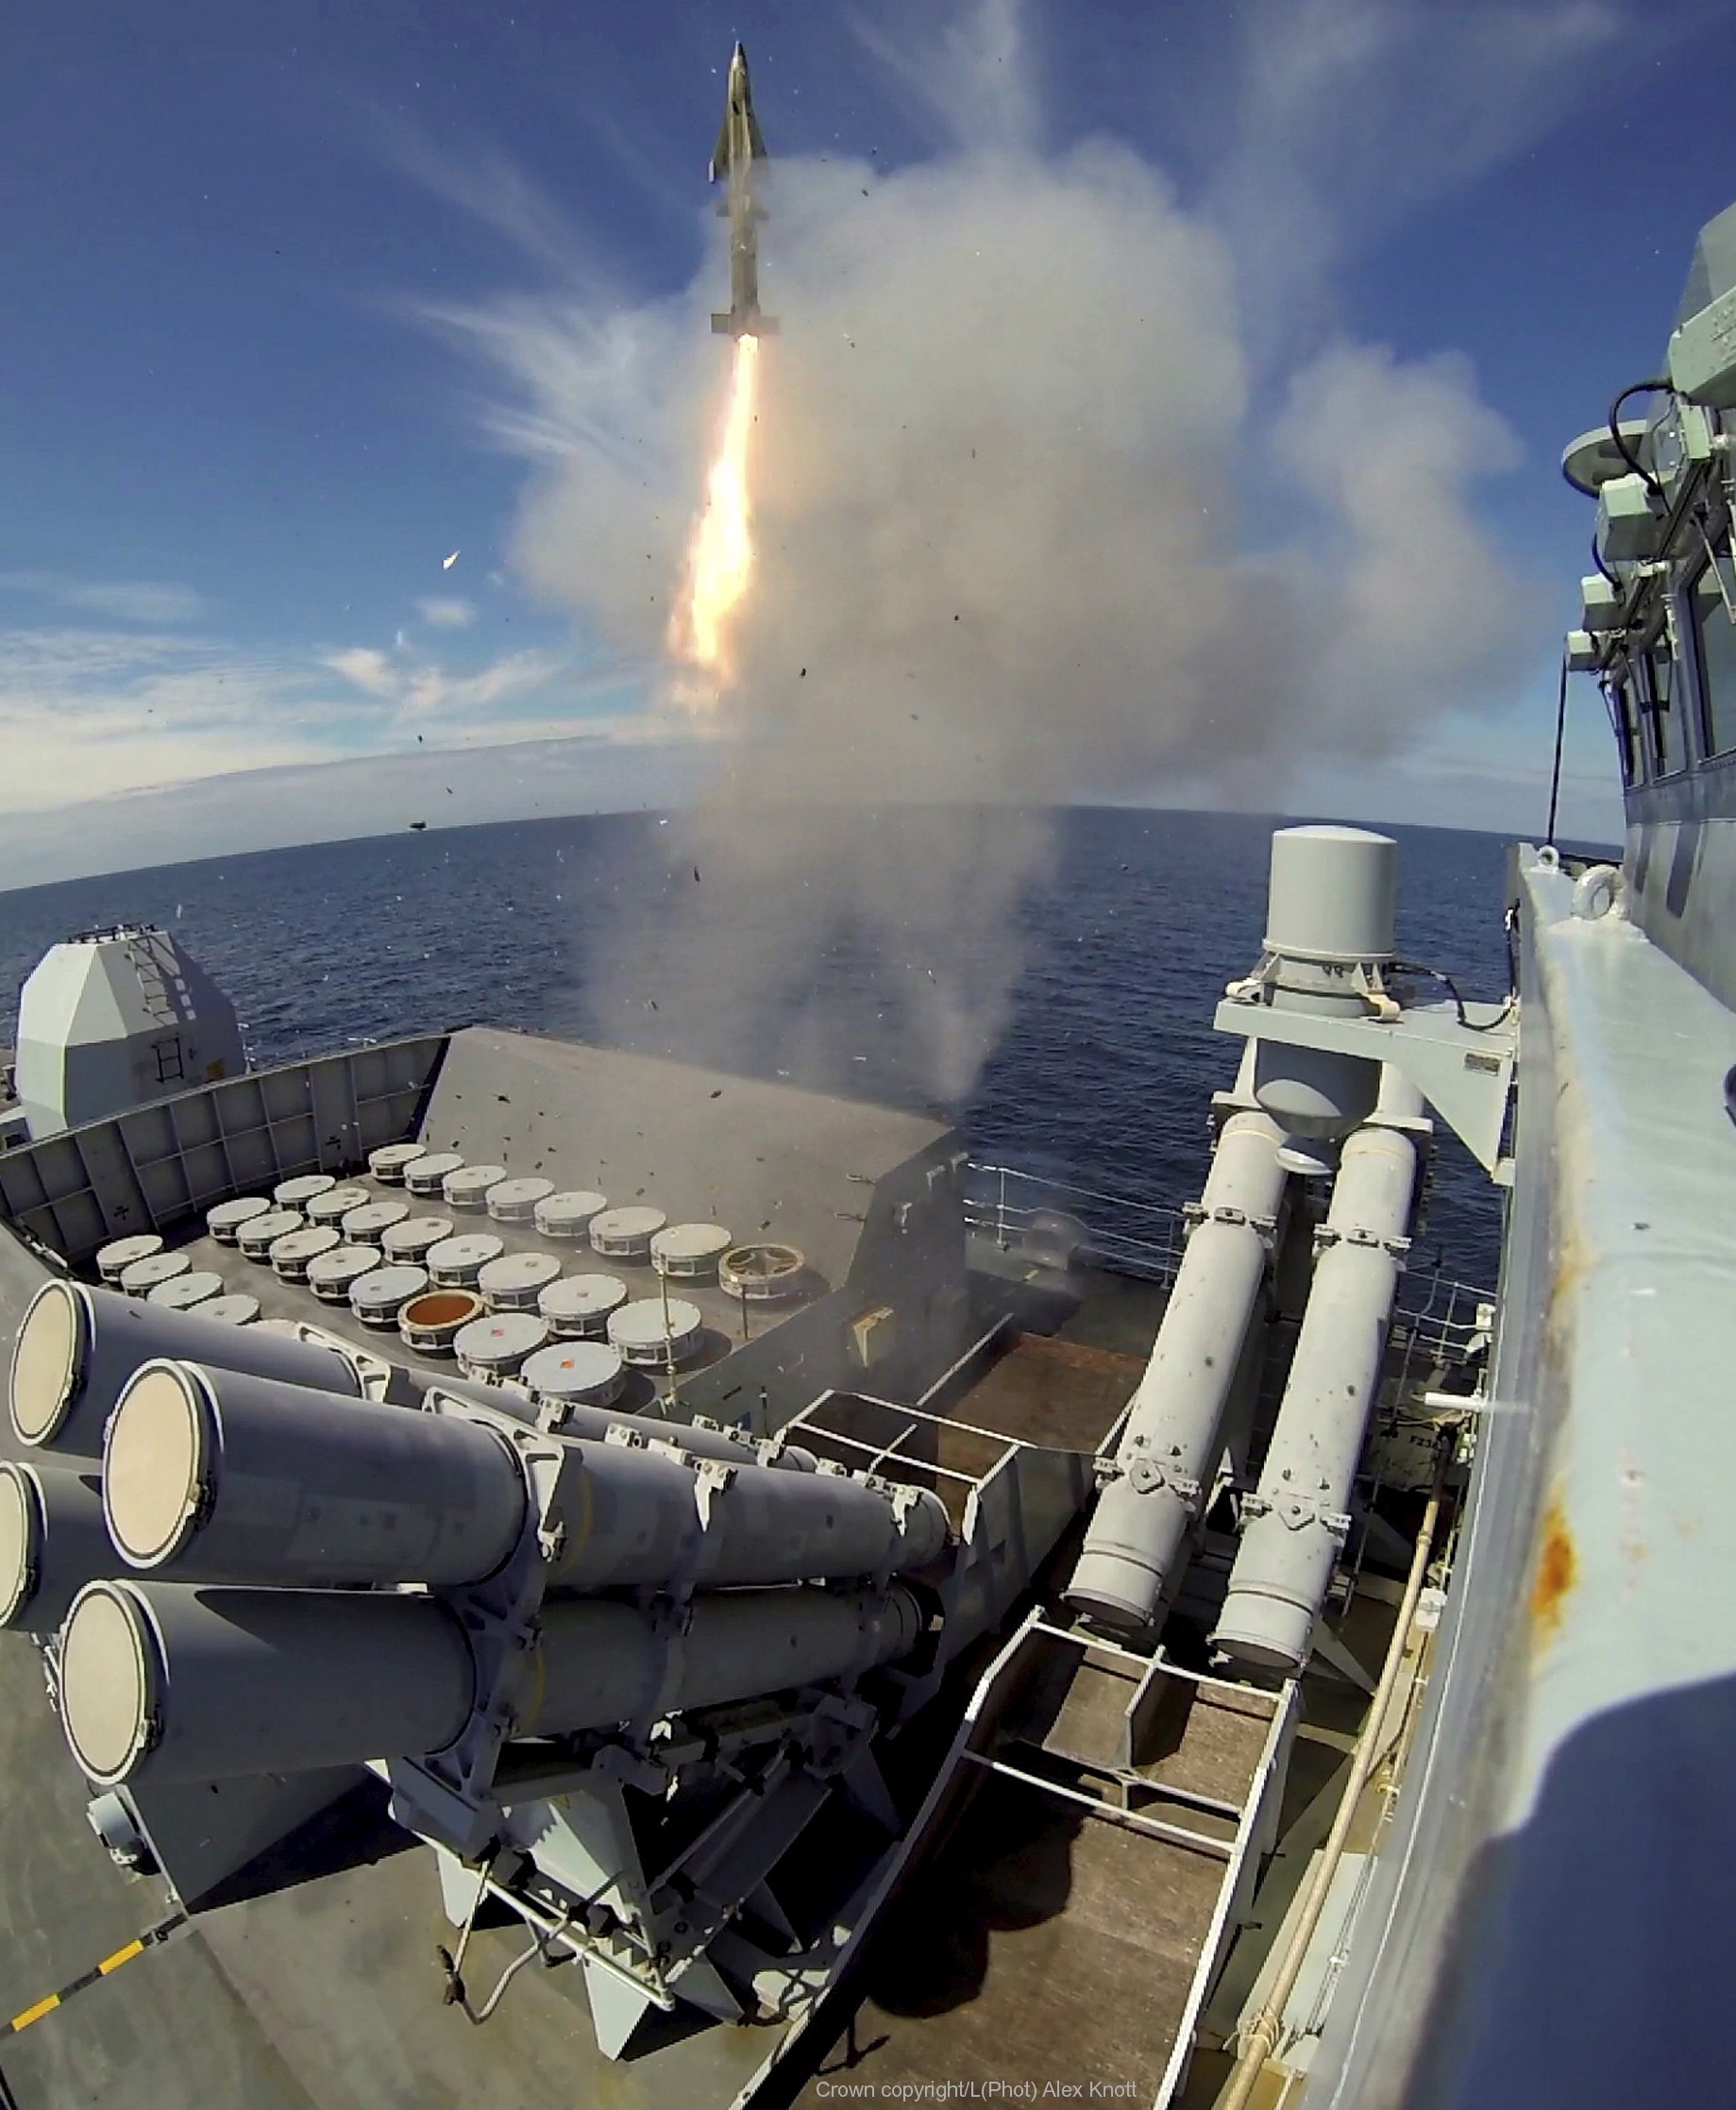 sea wolf sam missile gws-26 guided weapon system vertical launch type 23 duke class frigate royal navy 11